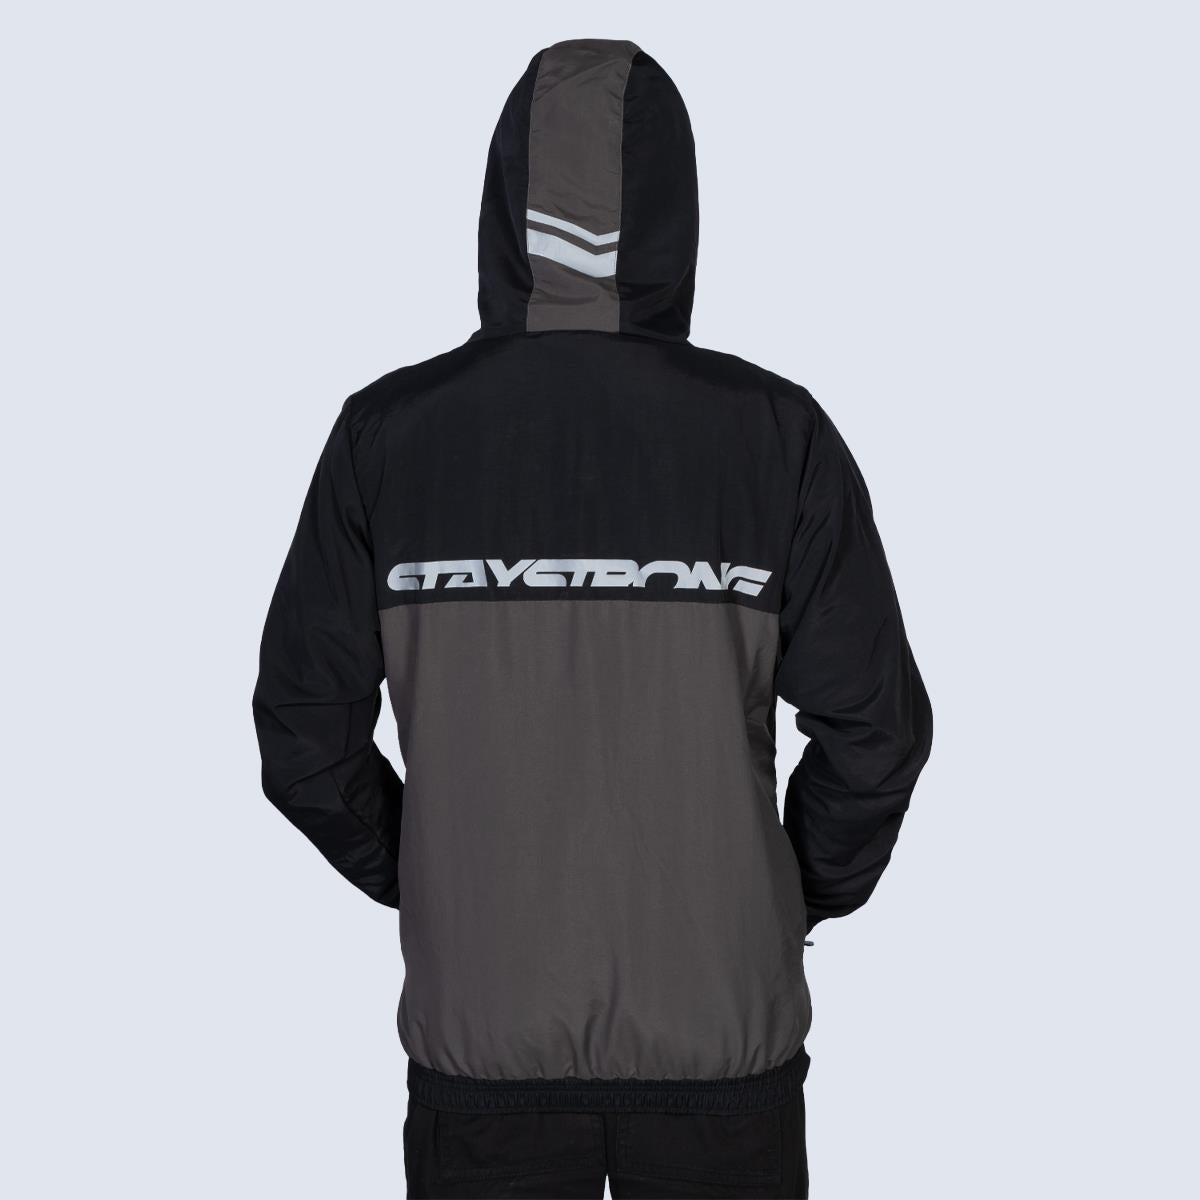 Stay Strong Cut Off Vertical Full Zip Jacket - Black/Grey